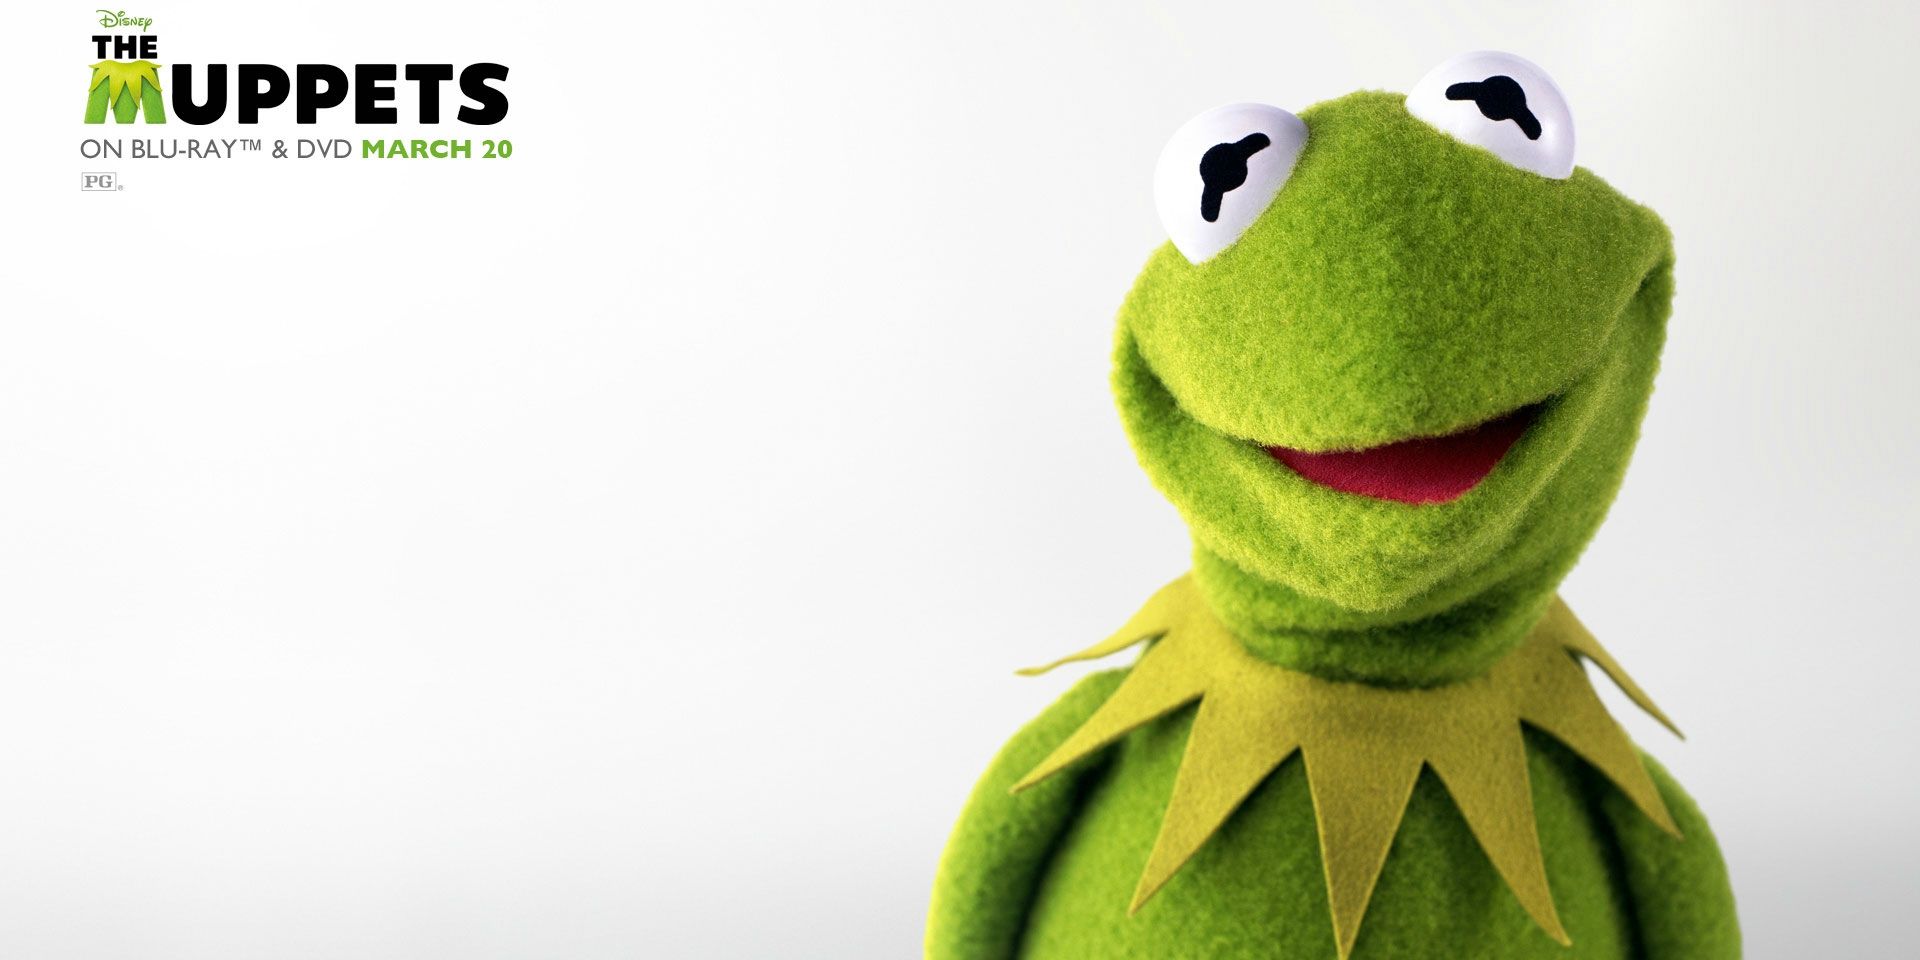 Kermit the Frog from 2011's The Muppets